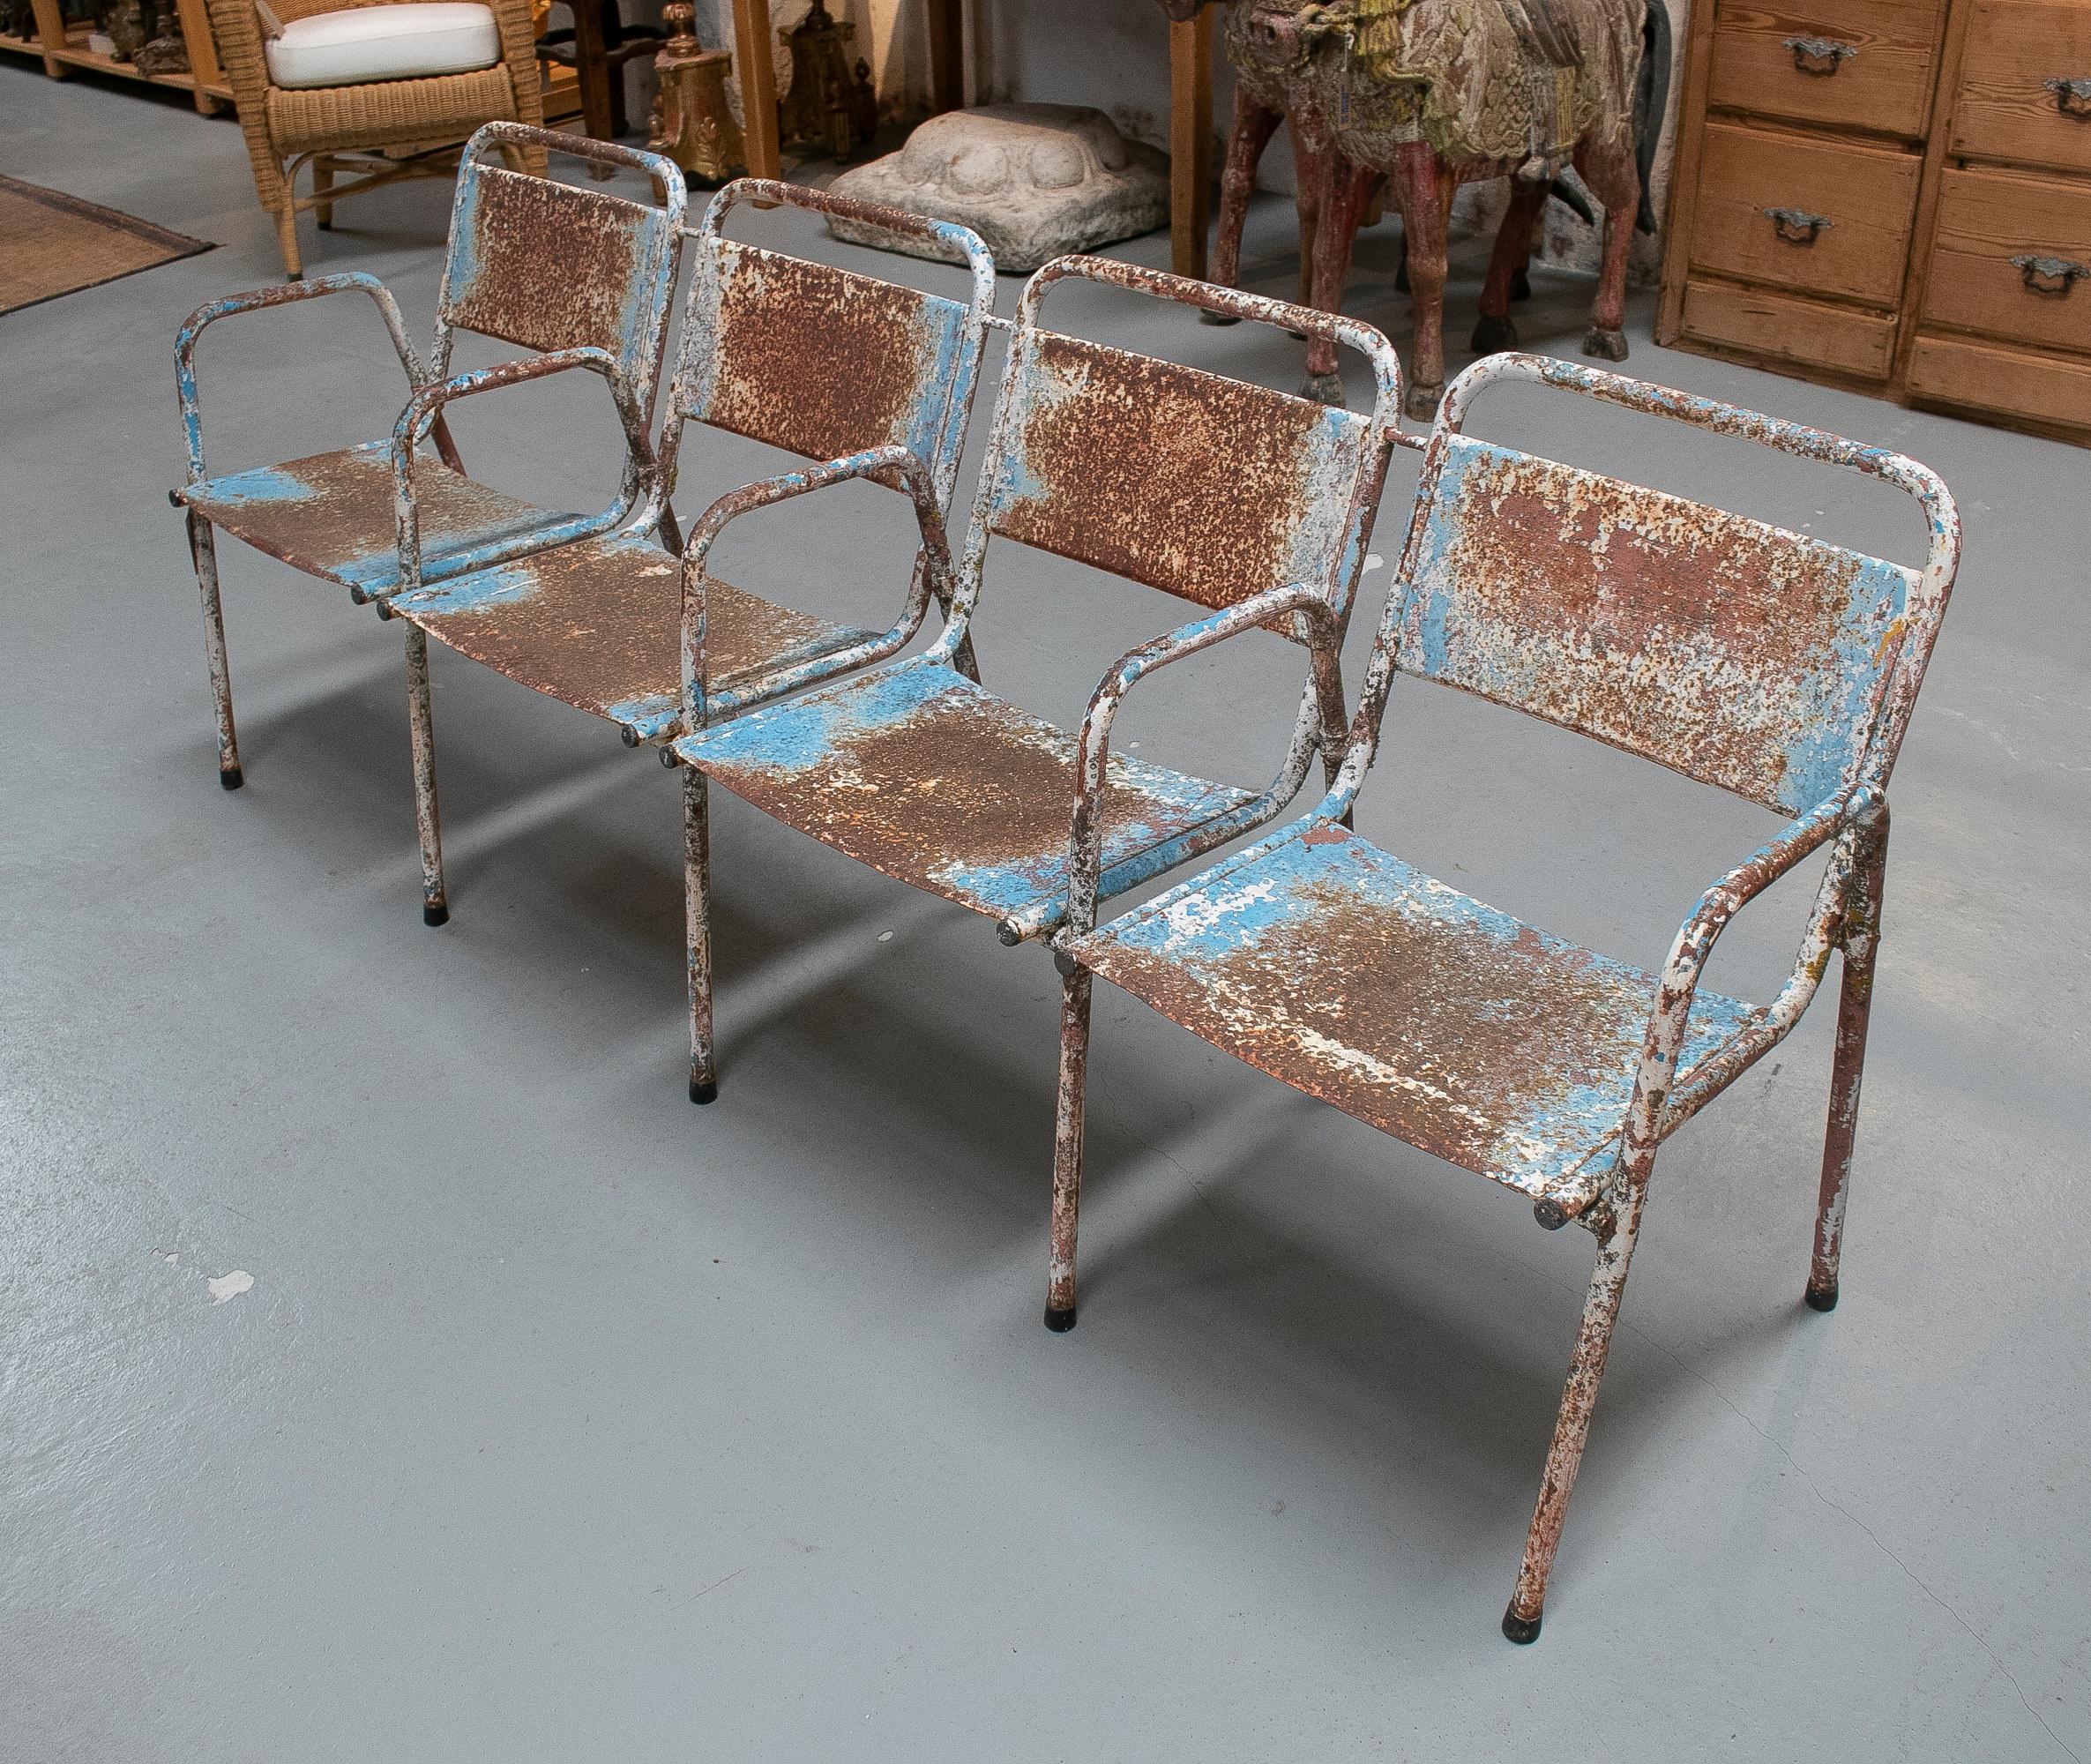 Vintage Four-Seat 1970s Spanish Iron Cinema Bench In Good Condition For Sale In Marbella, ES